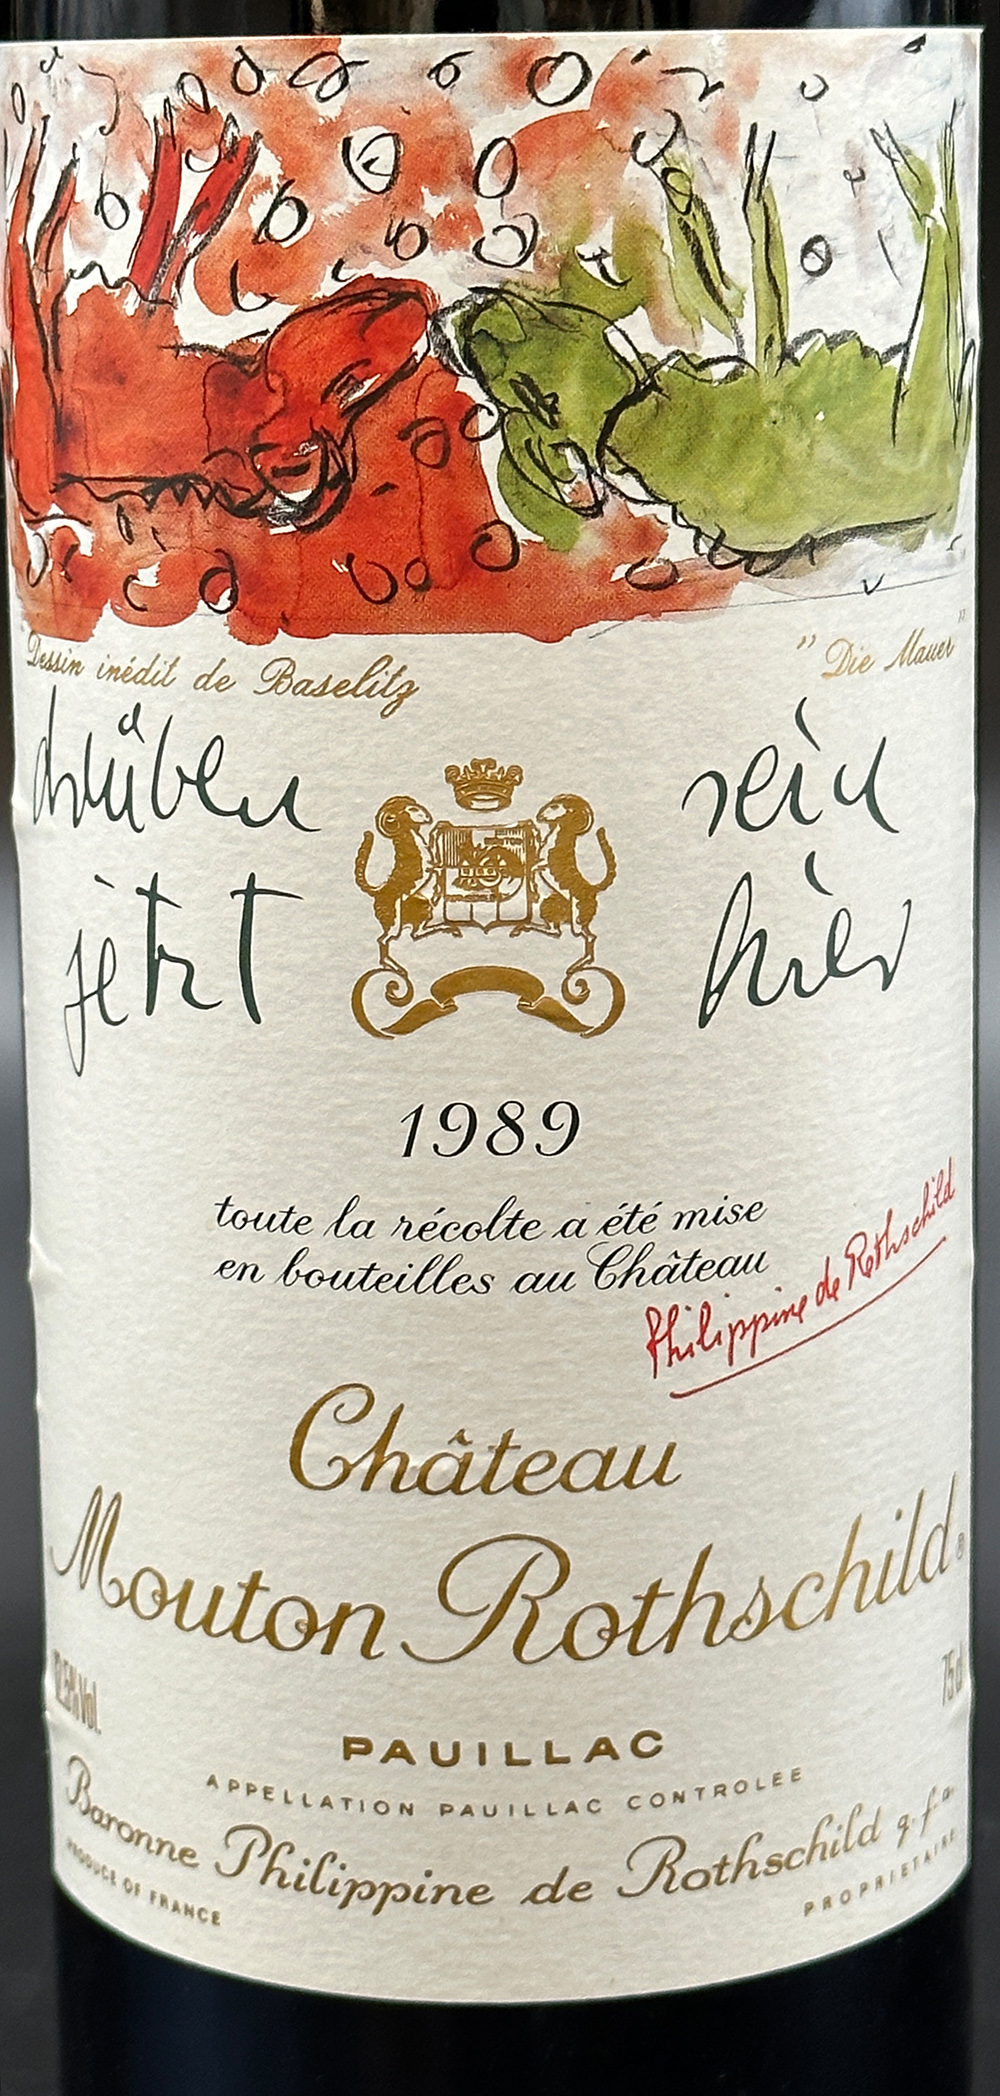 1 bottle of red wine. Château Mouton ROTHSCHILD. Paulliac. 1989. France. - Image 2 of 4